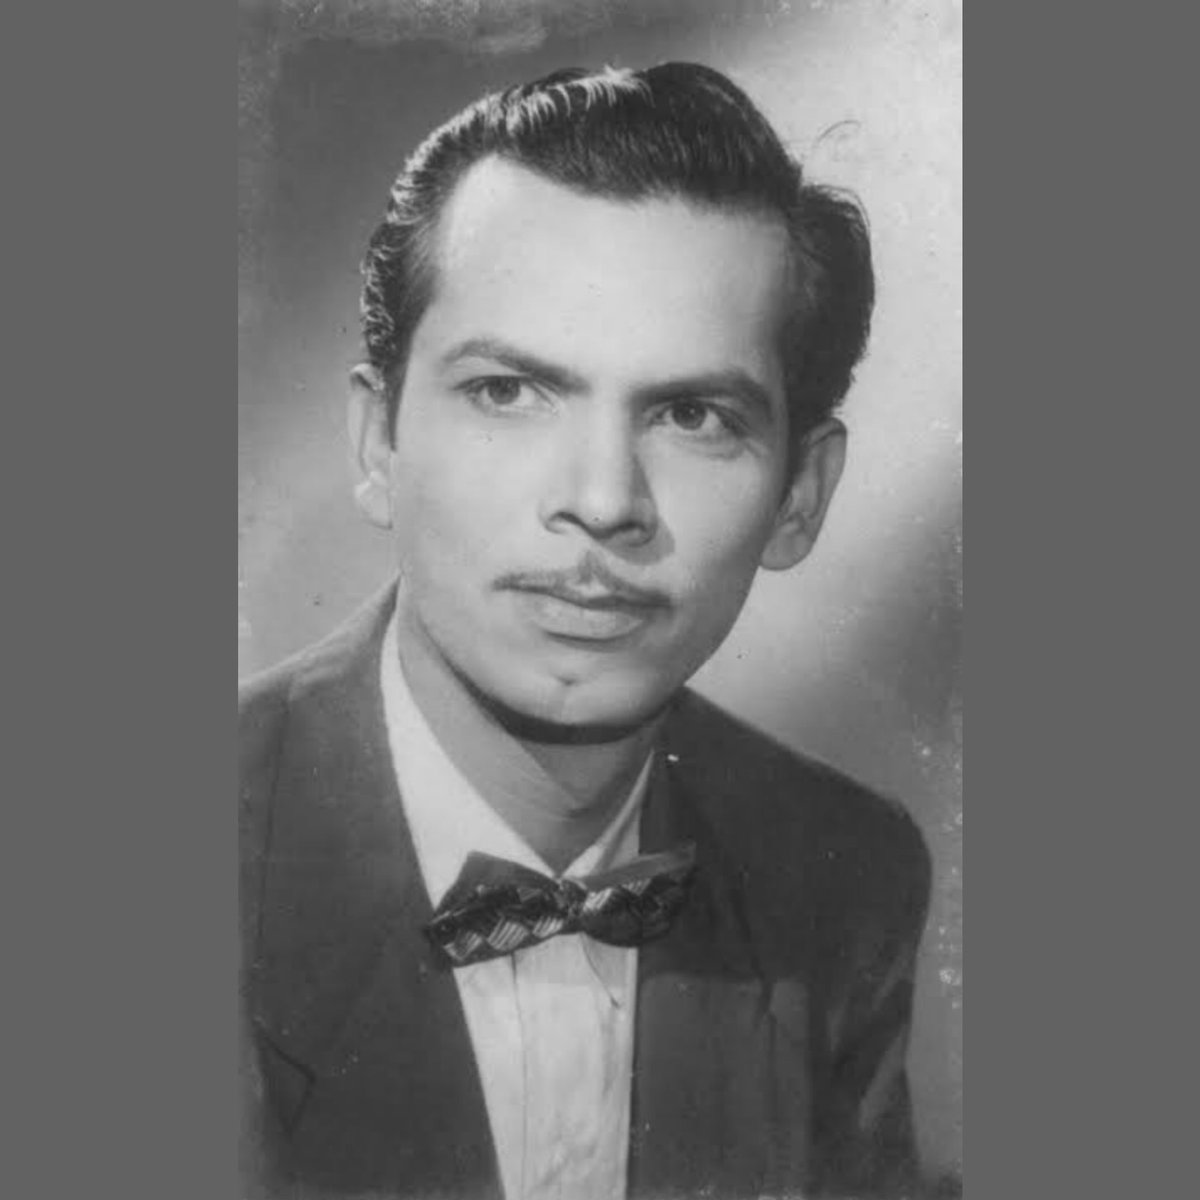 #johnnywalker my father was a simple man even at the height of his stardom. Remembering him on his death anniversary 29 Jul 2003. love u dad, miss u ❤️ u bring a smile to my face ...